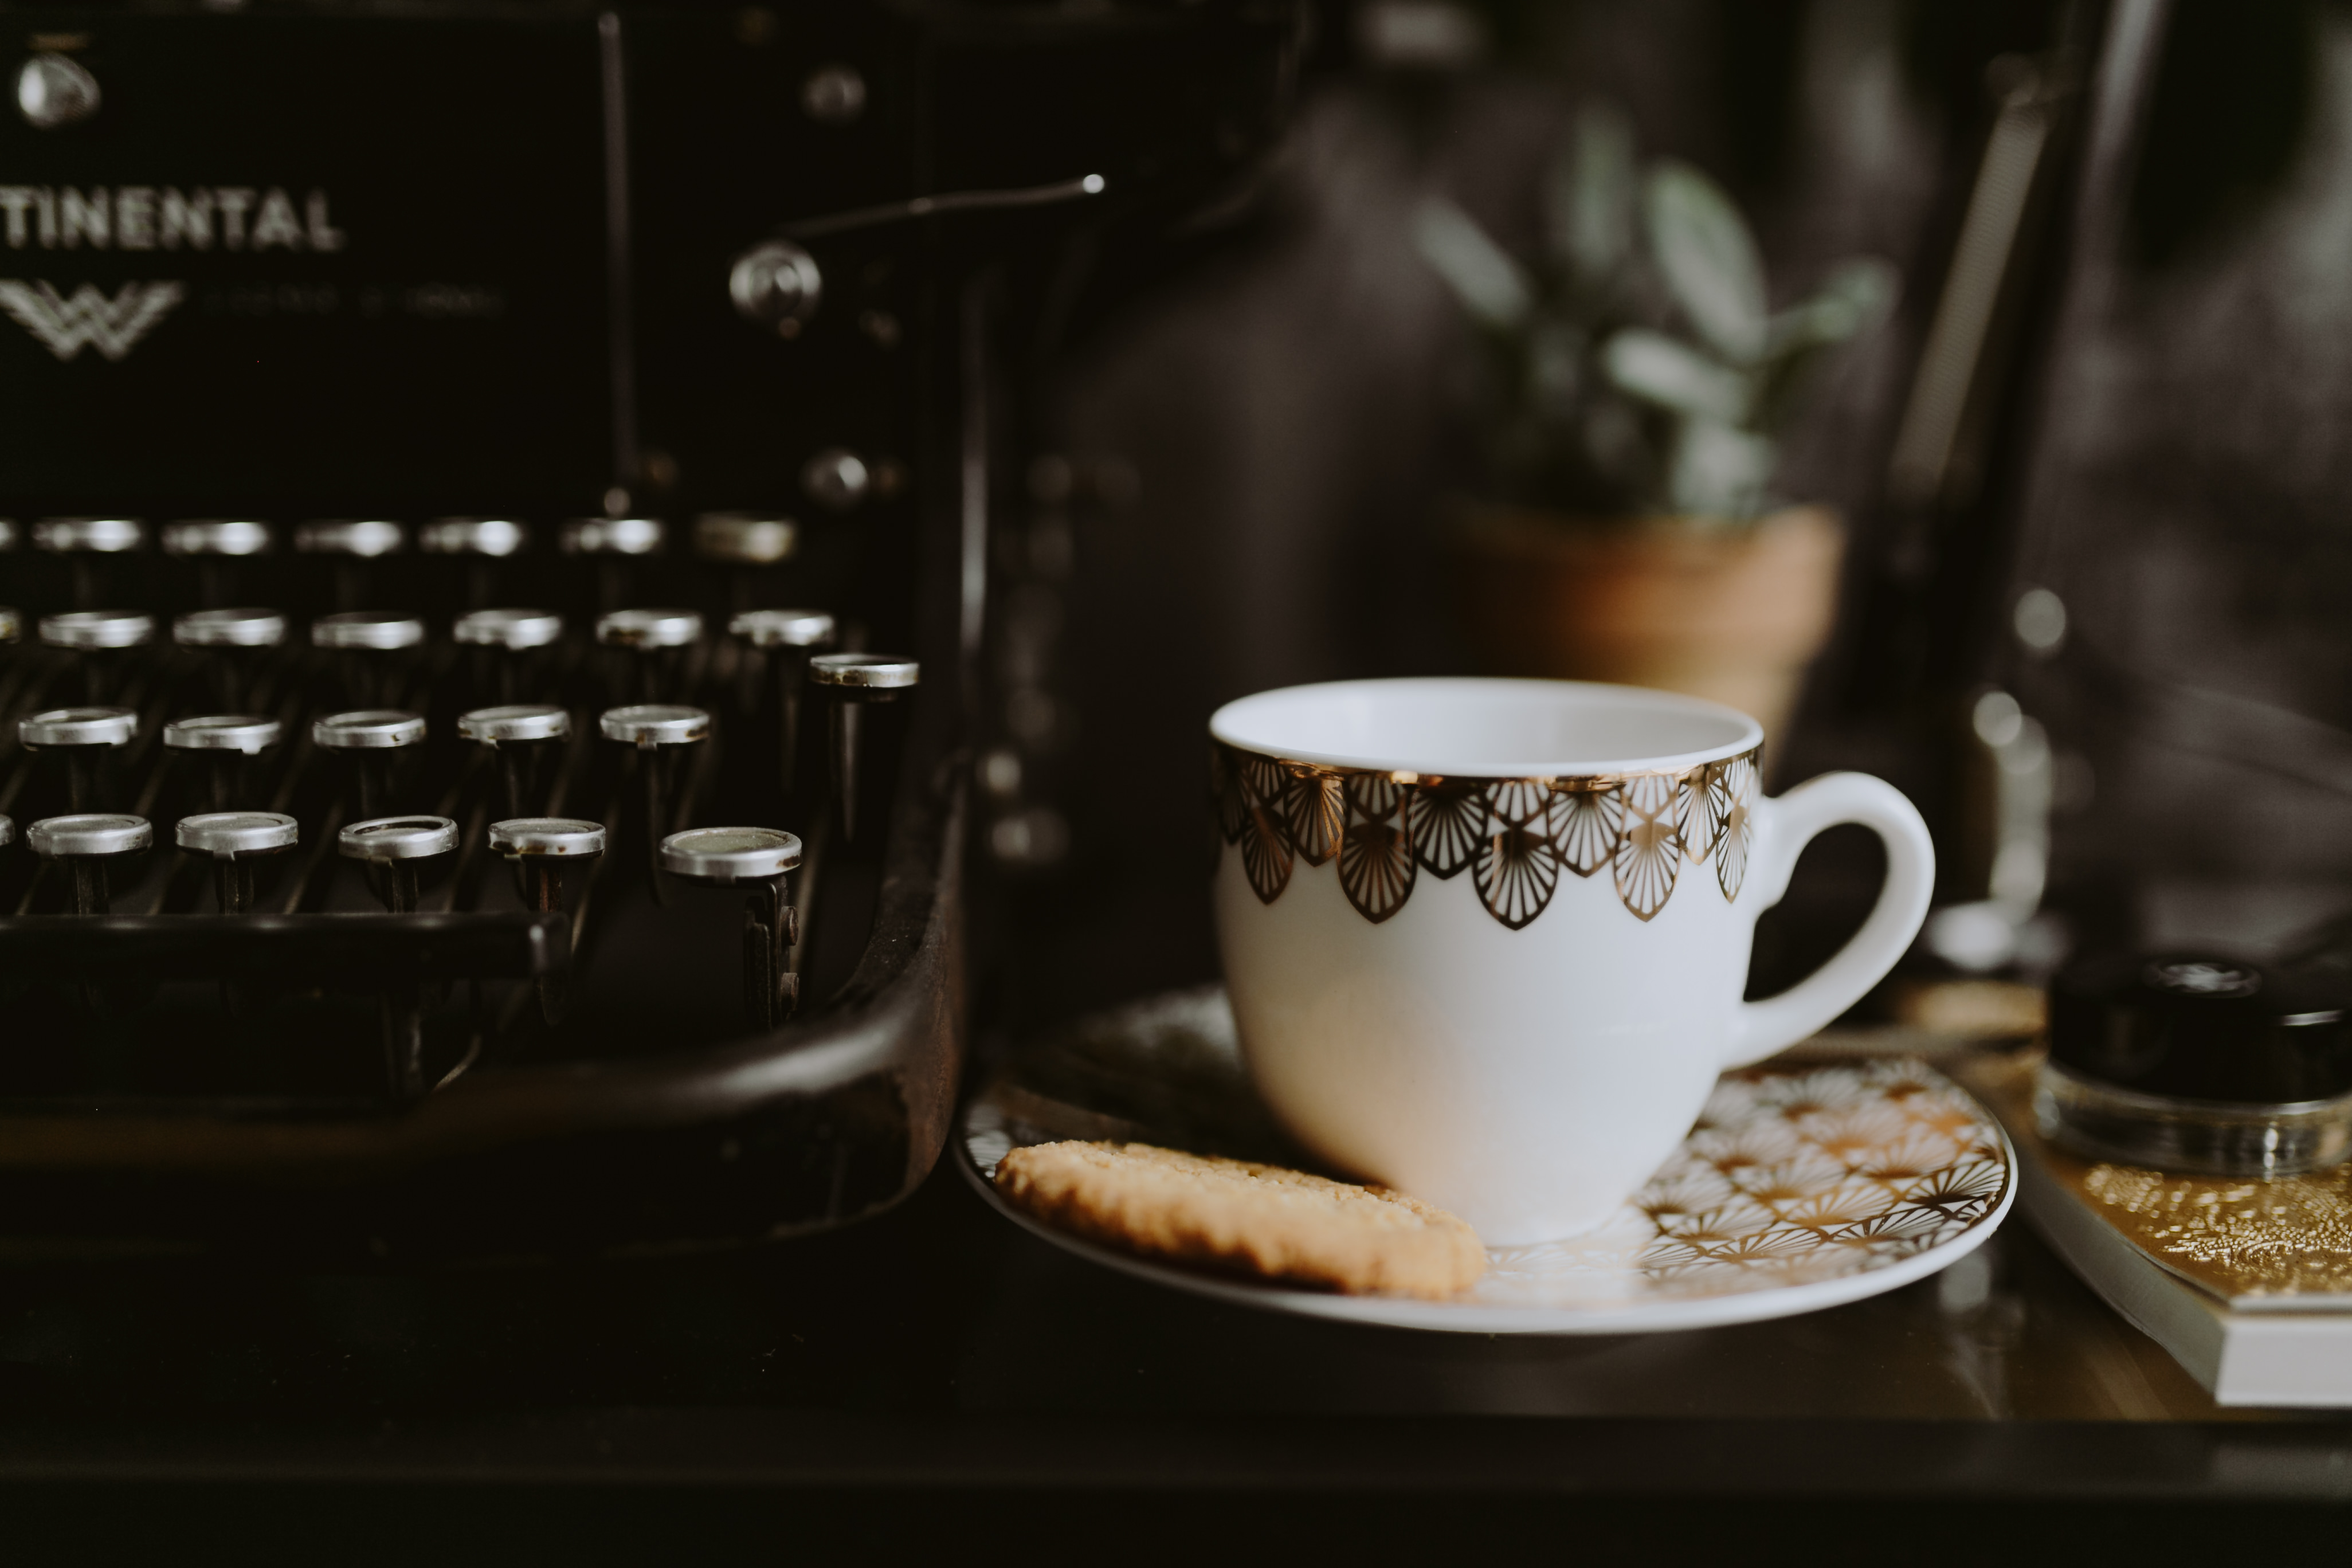 cup, cookies, miscellanea, miscellaneous, keys, typewriter, saucer Full HD